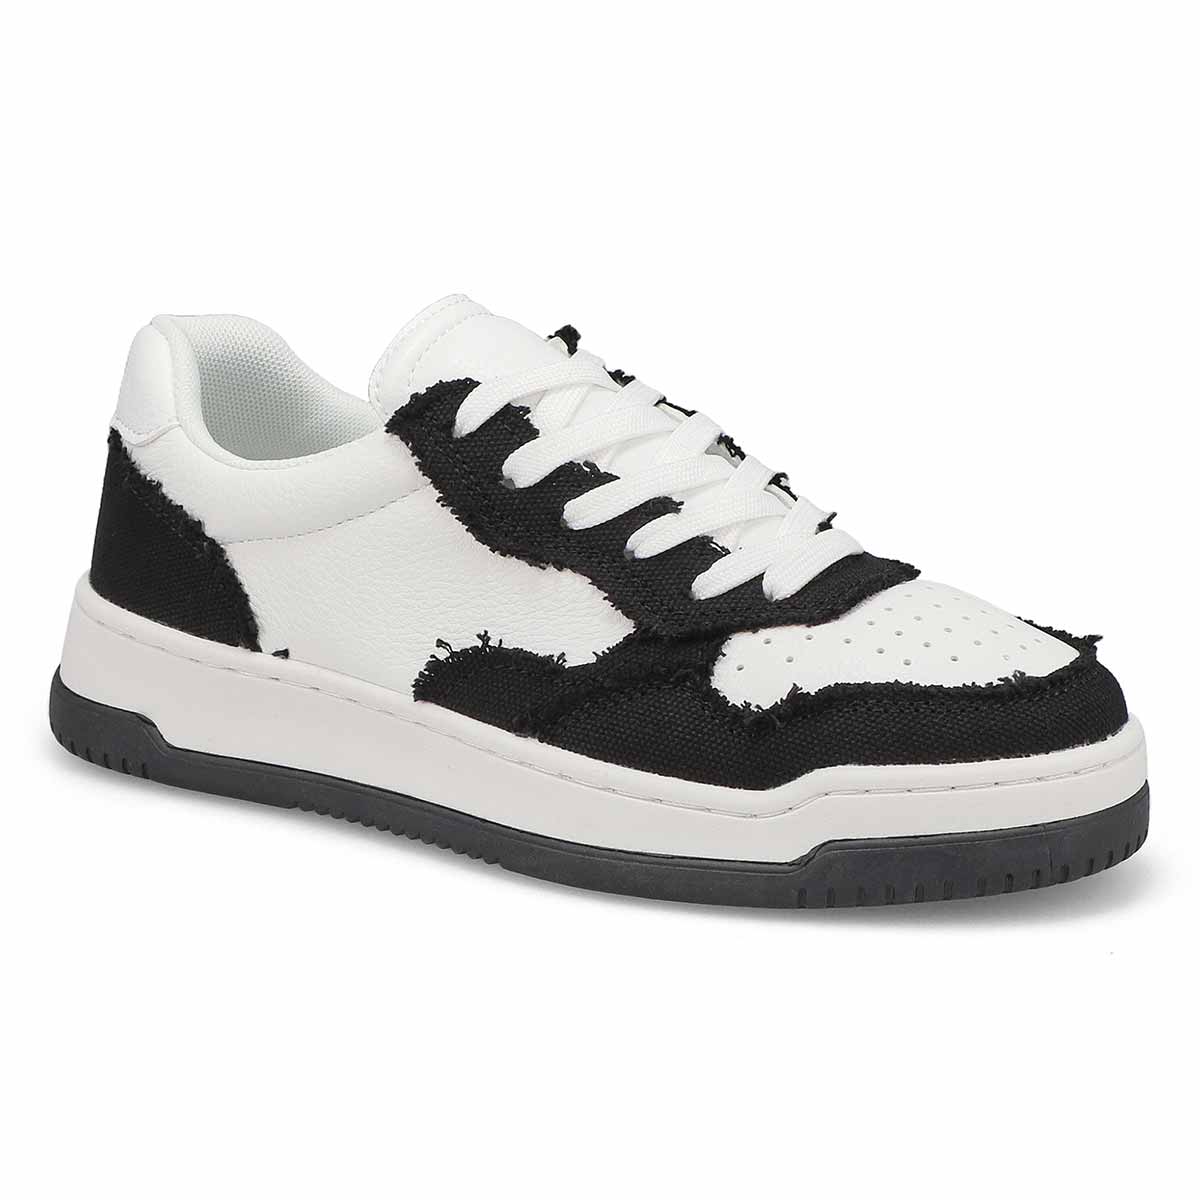 Womens Brynlee Lace Up Sneaker - White/Black